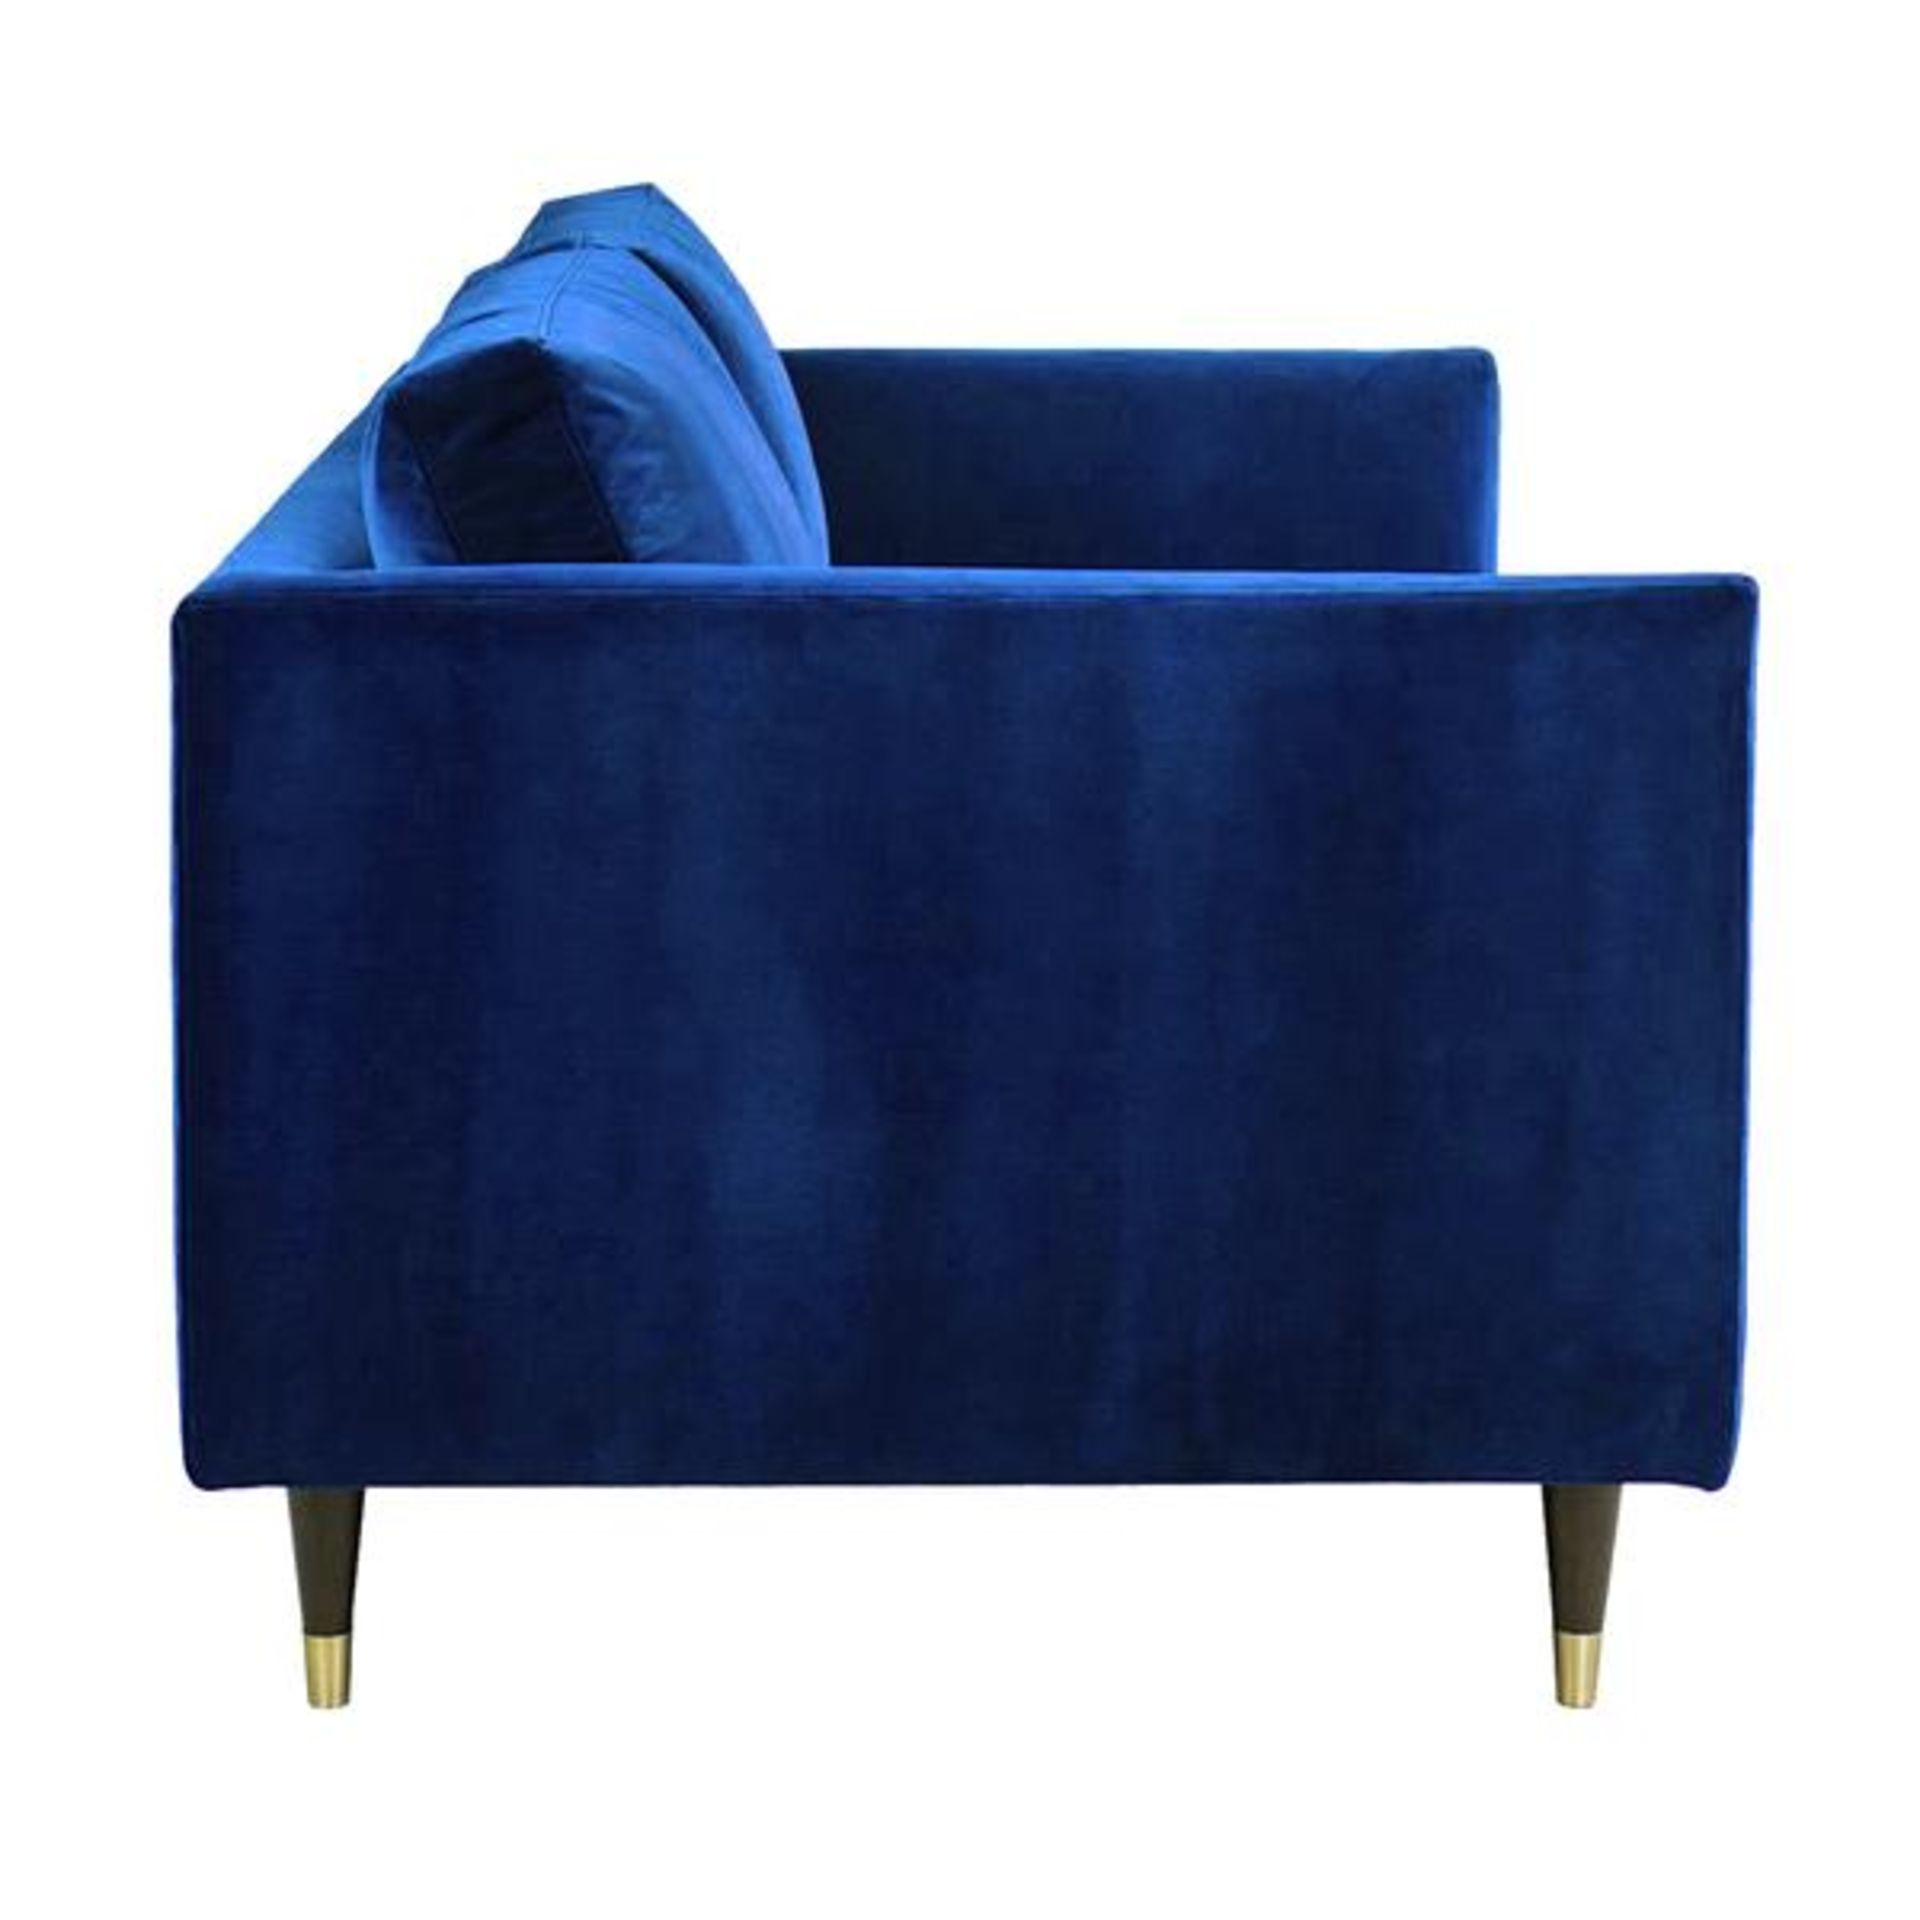 Henry Two Seater Velvet Sofa - Royal Blue Henry is a contemporary sofa collection with classic - Image 3 of 4